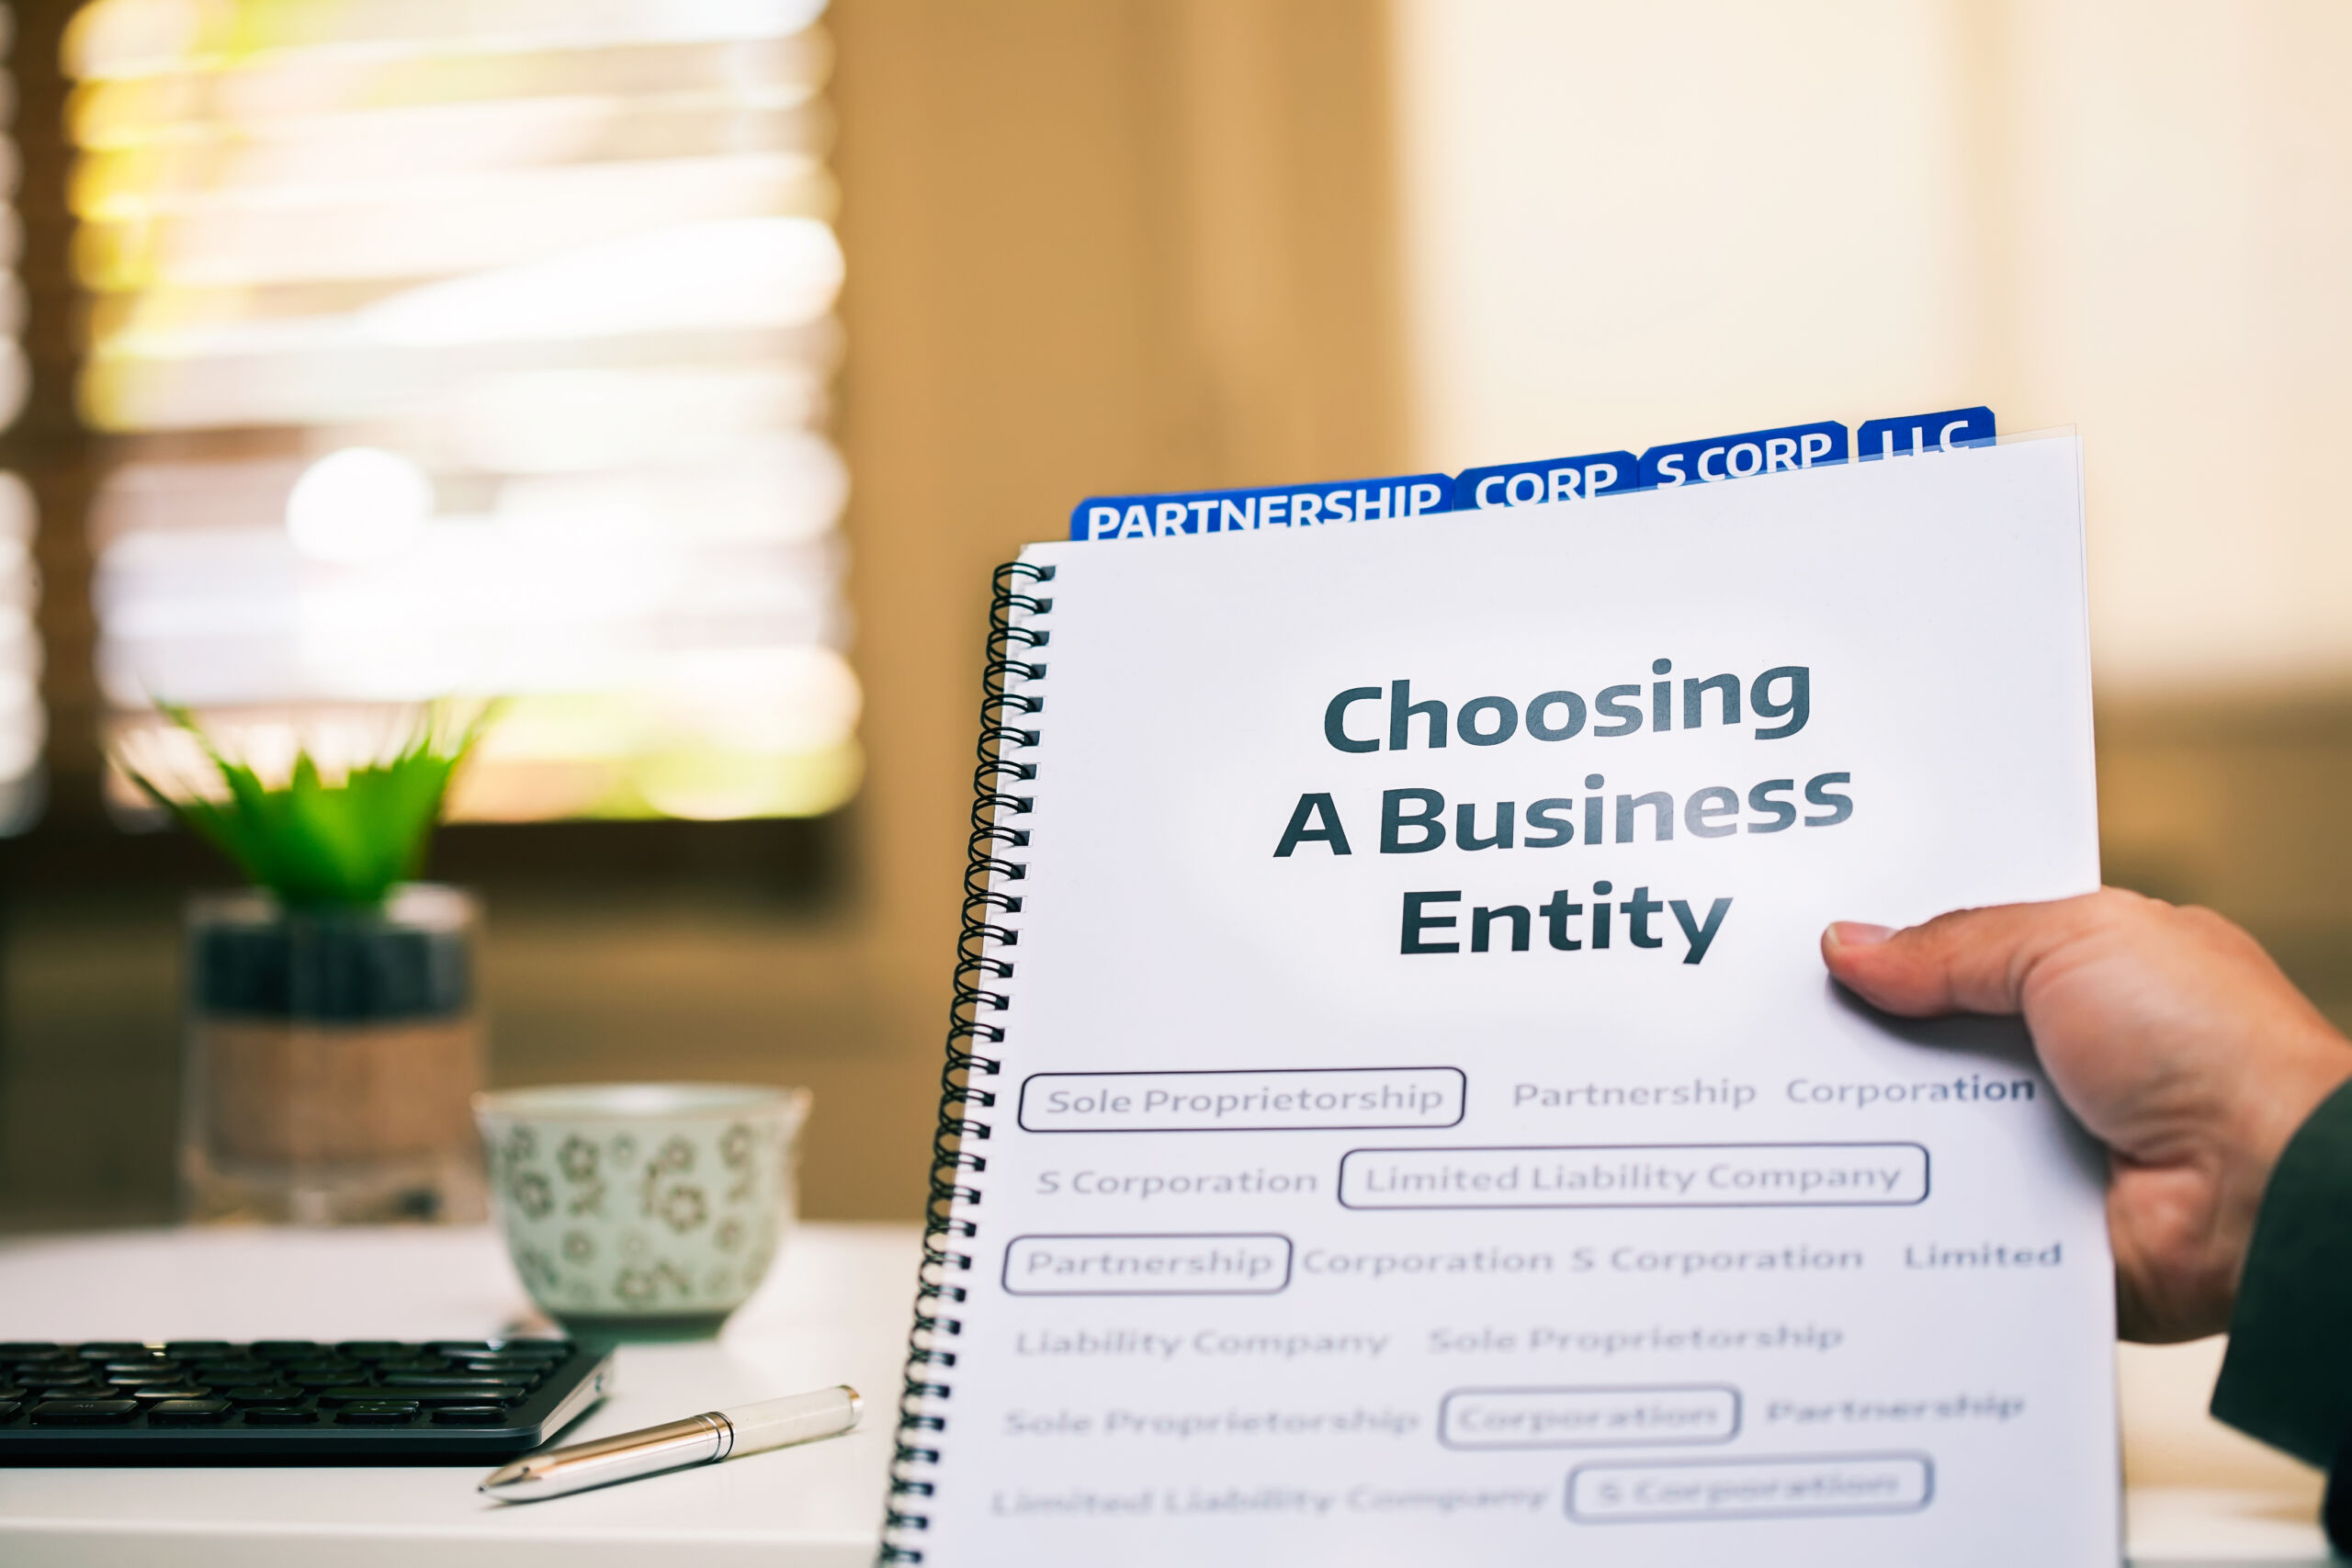 A person holds up a booklet titled 'Choosing A Business Entity' with key terms listed below.